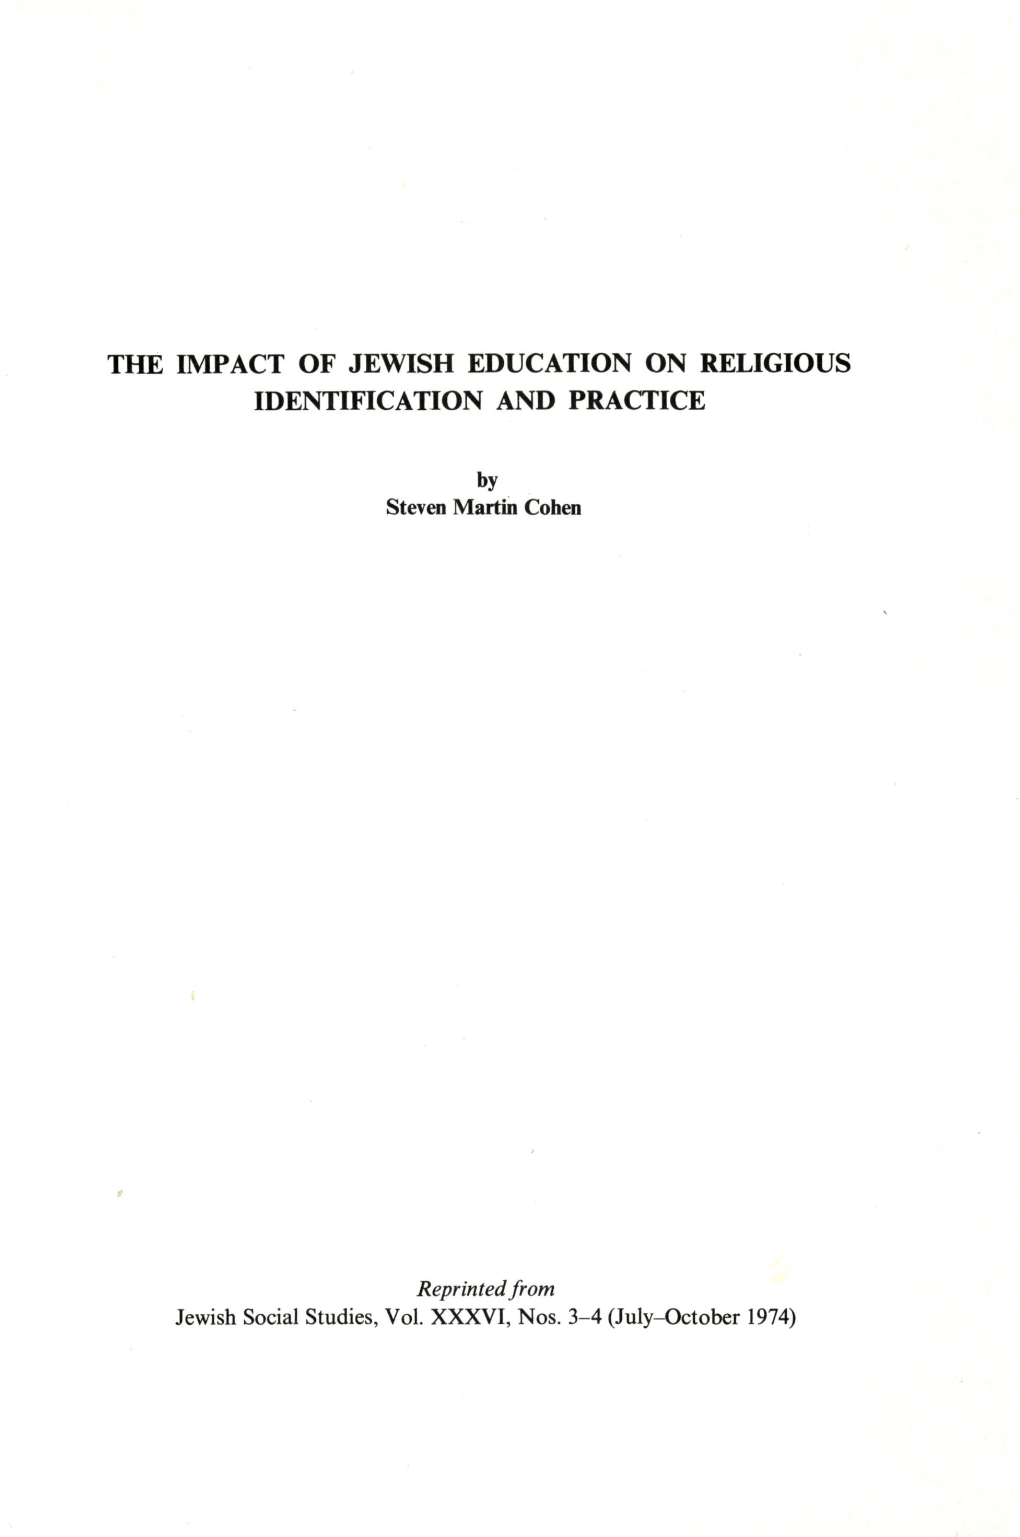 The Impact of Jewish Education on Religious Identification and Practice